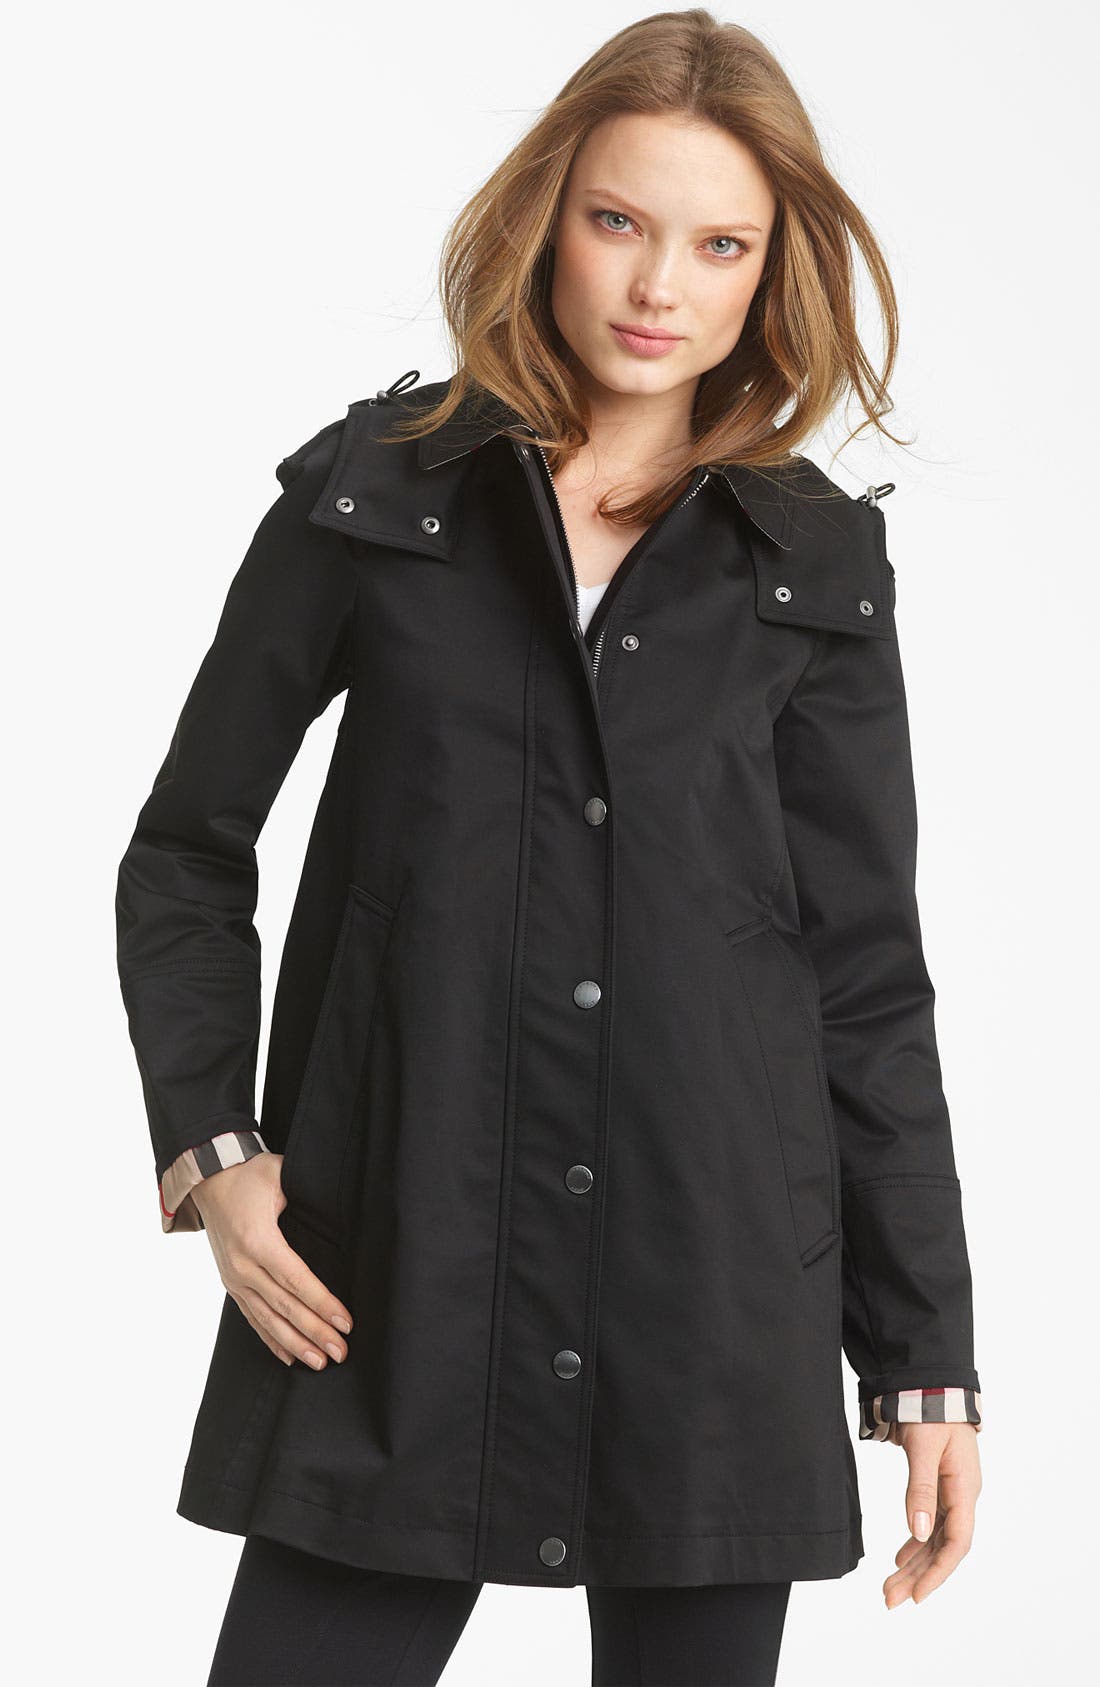 Burberry Brit 'Bowpark' Raincoat with 